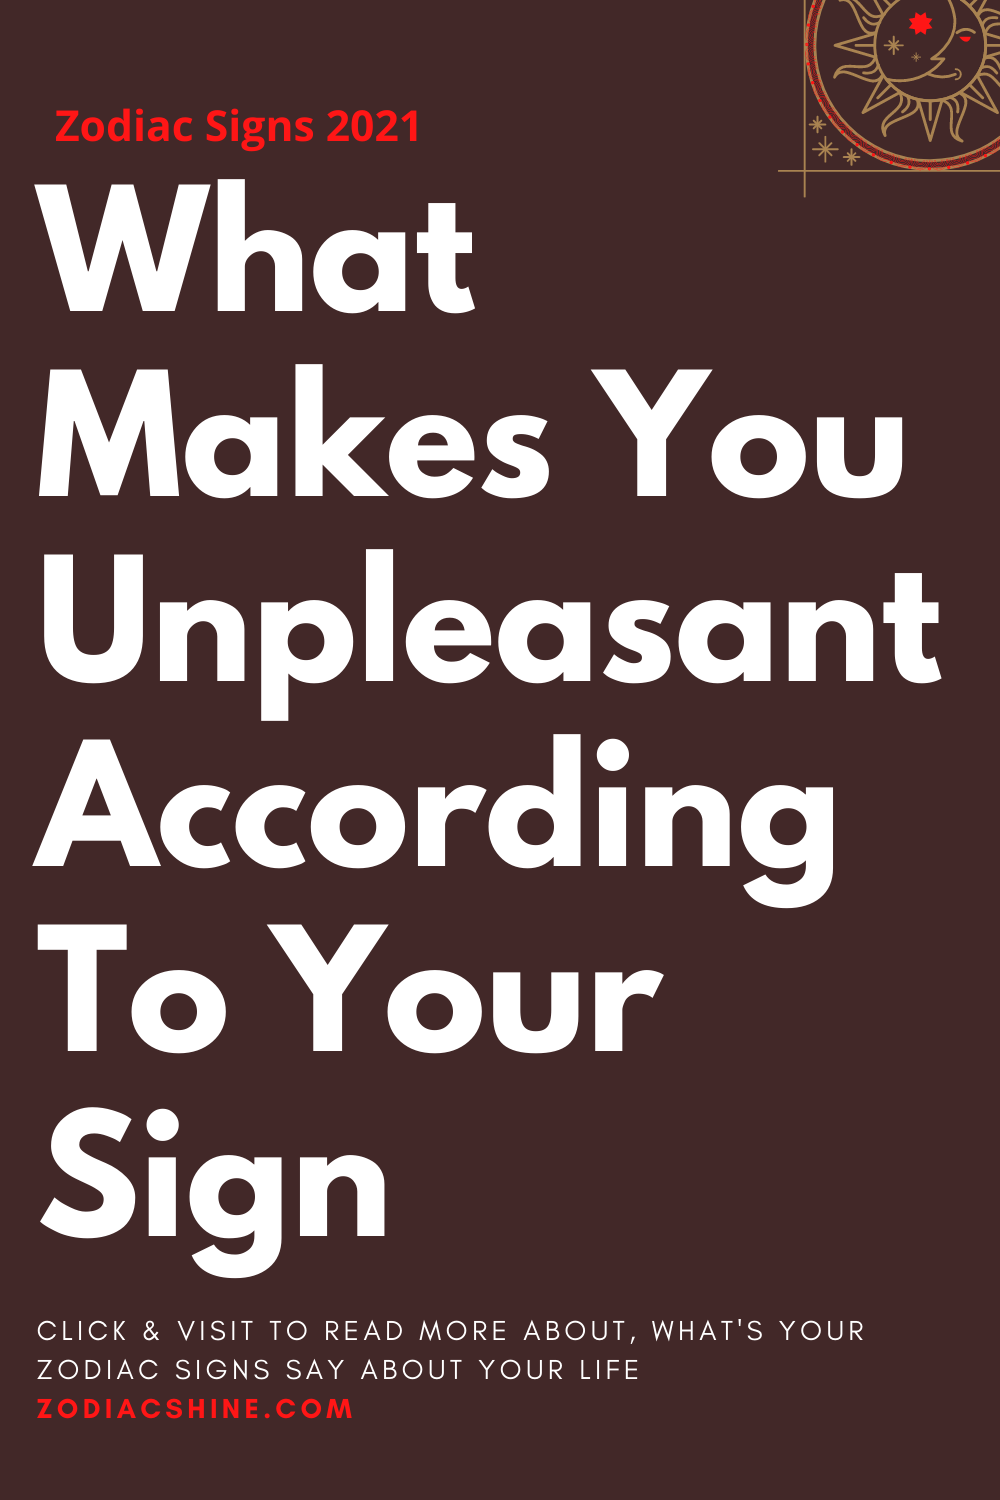 What Makes You Unpleasant According To Your Sign